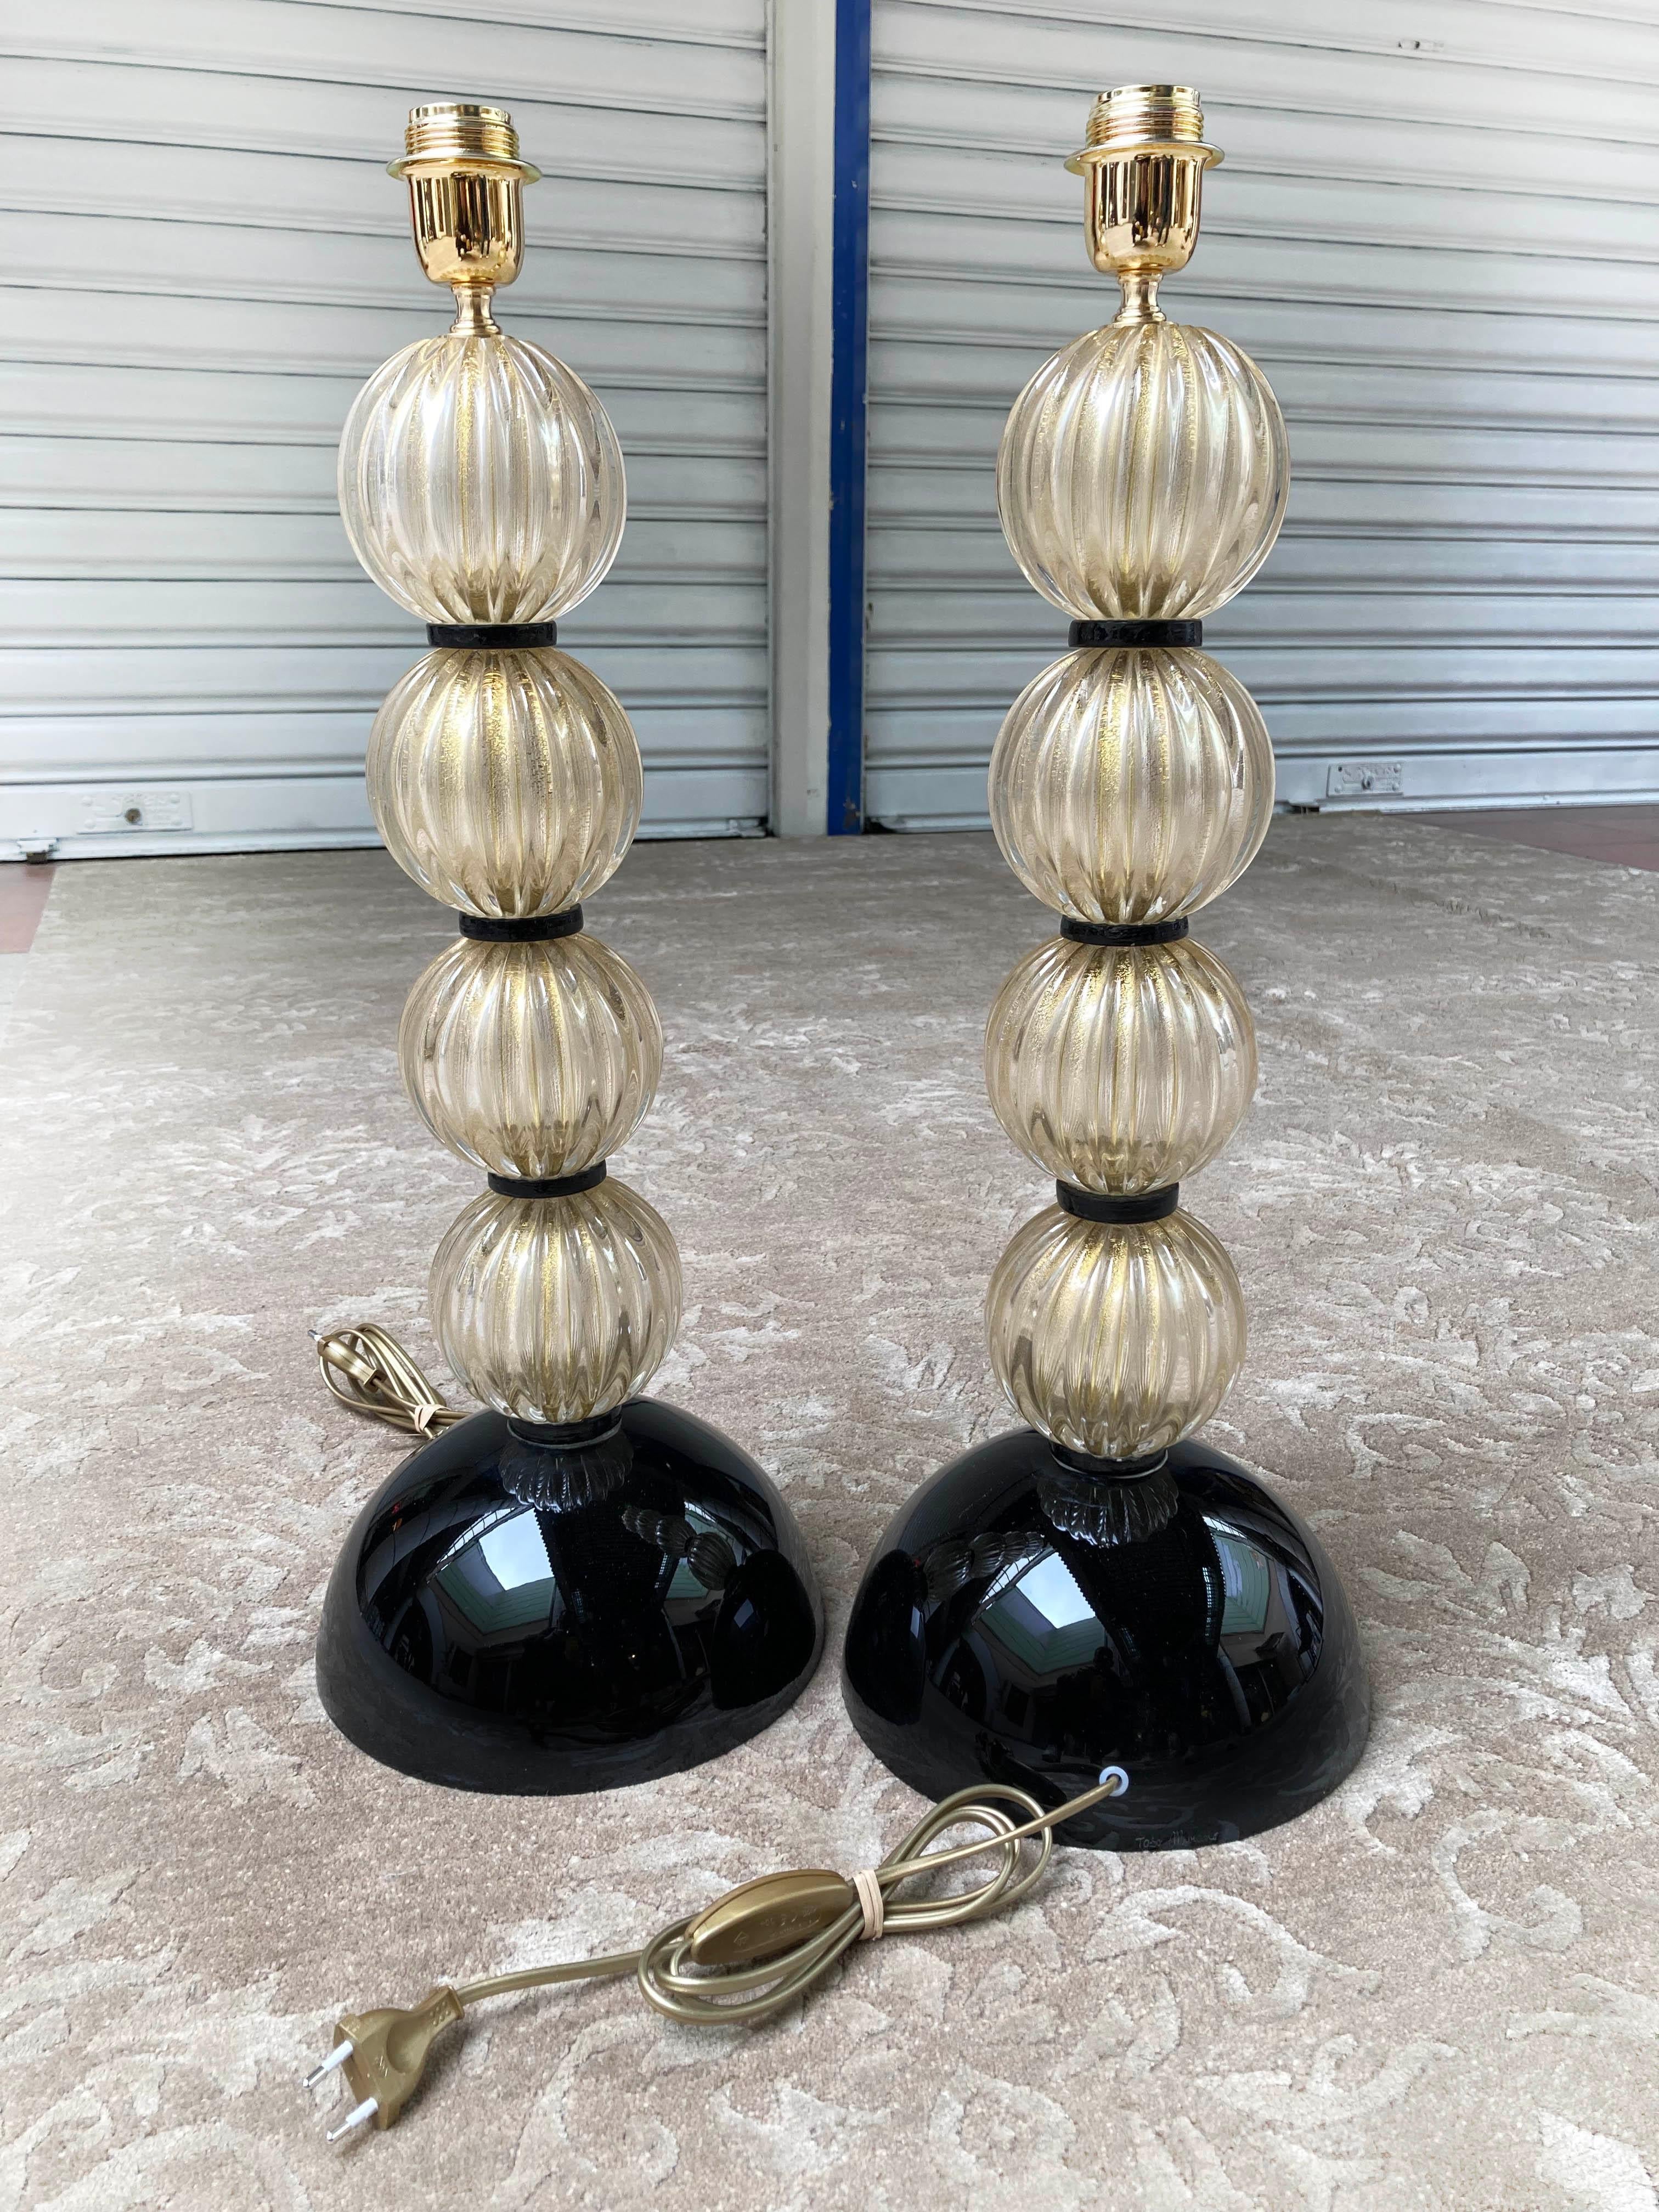 Pair of golden and black lamp bases - Signed Toso
Murano glass
Circa 1980
Measures: H 63 x D 23 cms
Signed at the foot
Shower feet with alternating ribbed glass spheres and smooth black glass pellets
In perfect condition / Electrical operation